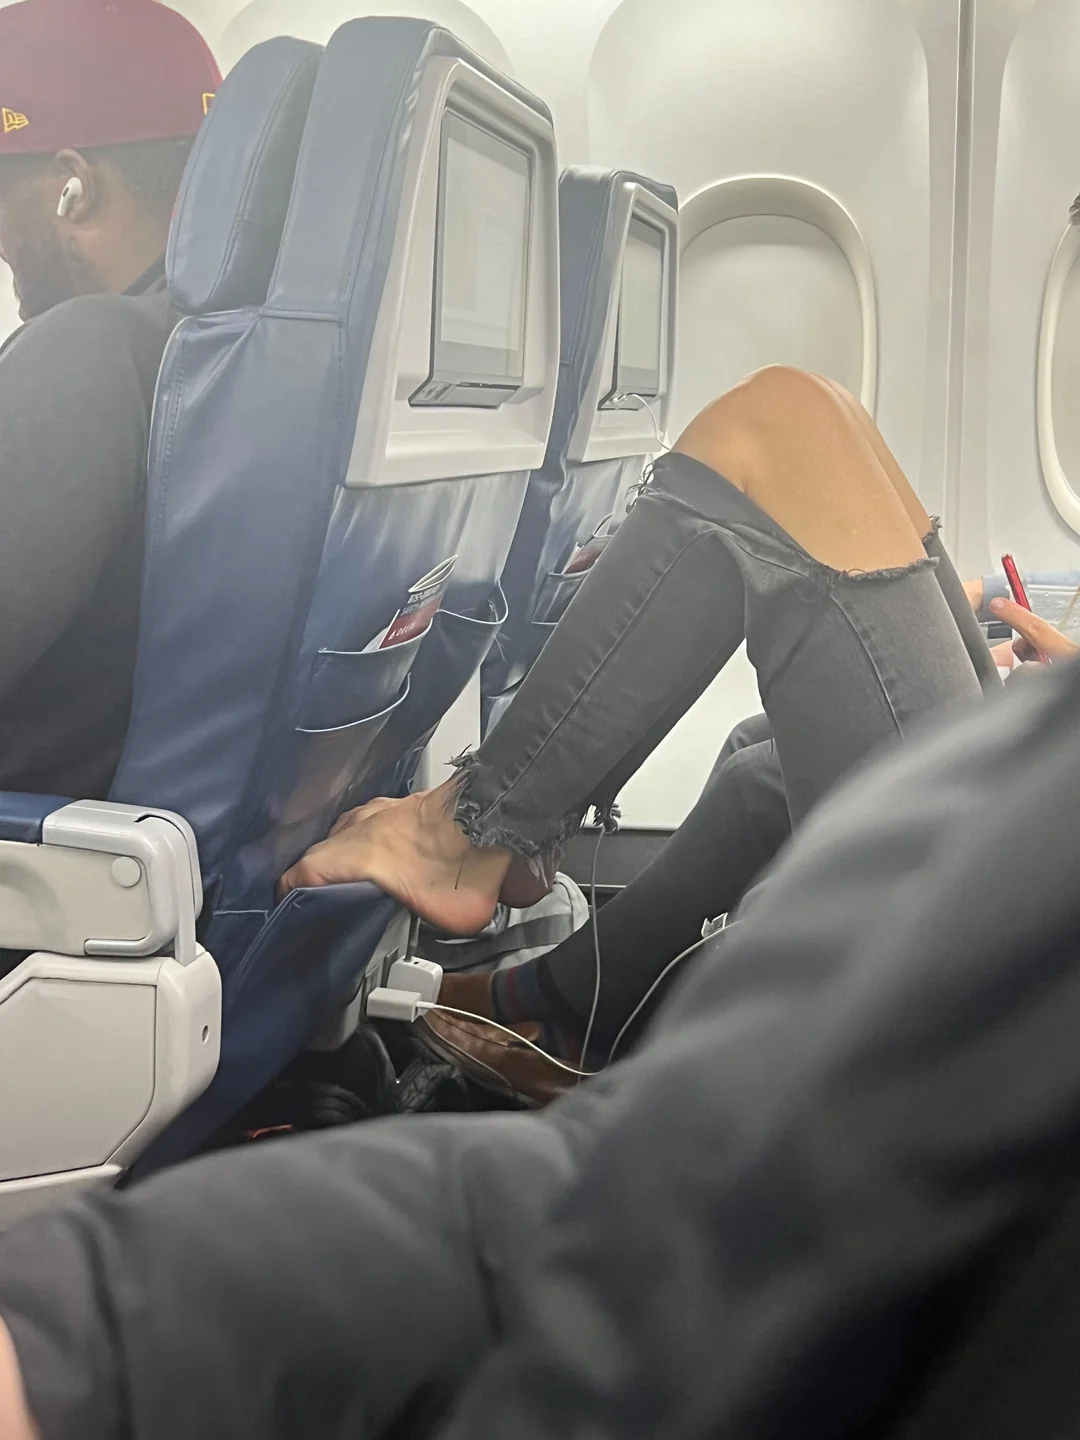 Think Twice Before Putting Your Feet Into the Seat Pocket – What Might ...